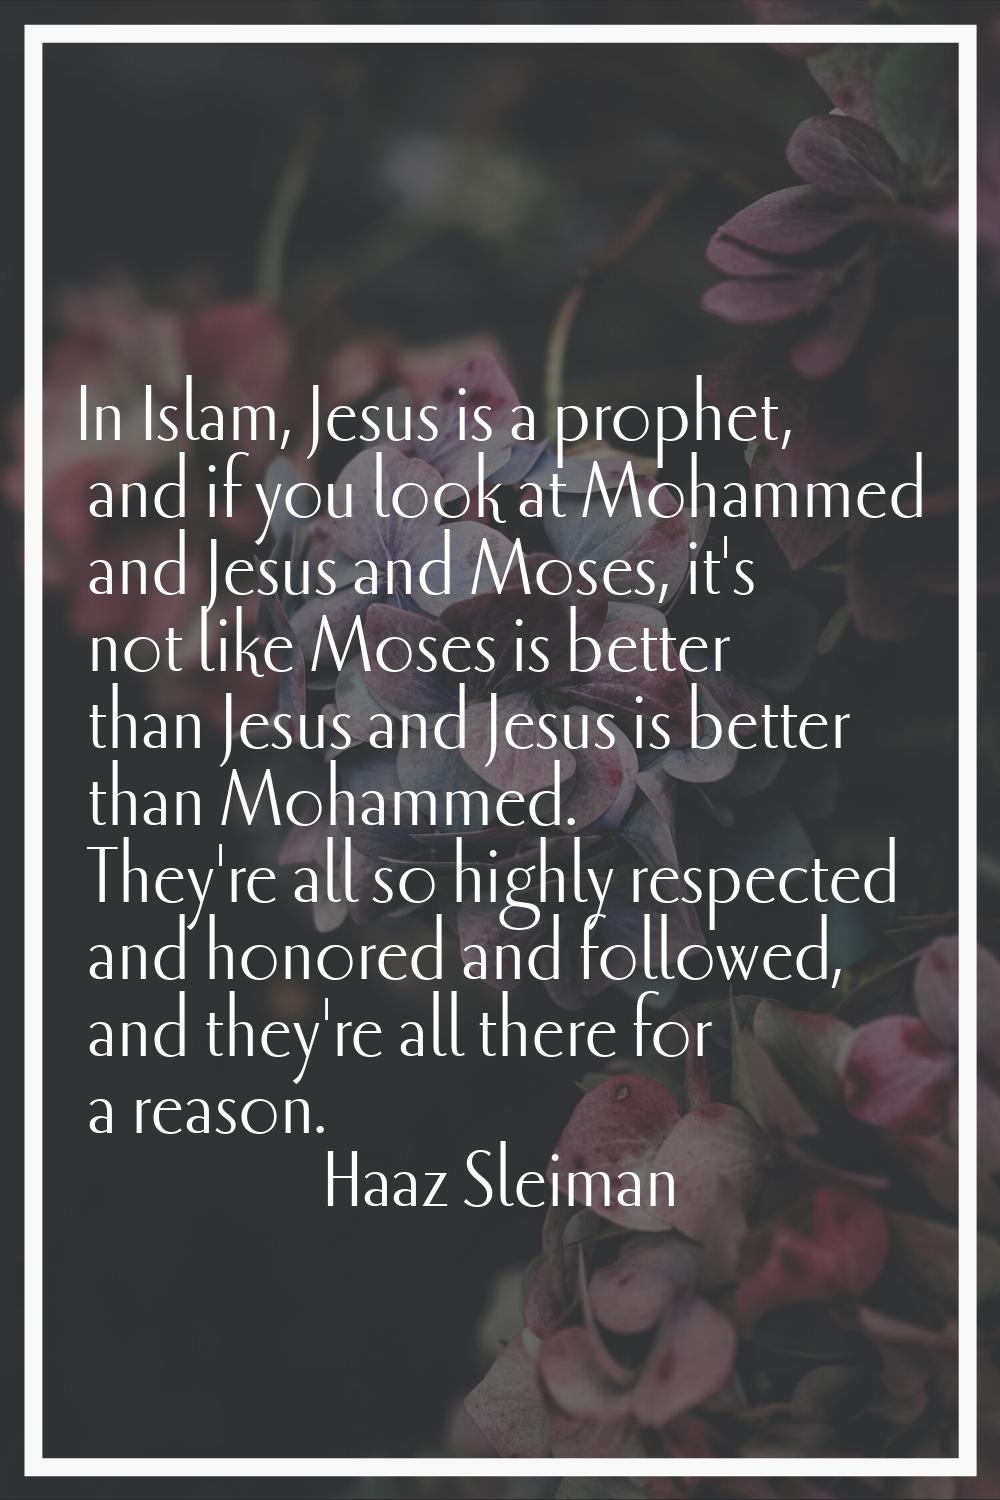 In Islam, Jesus is a prophet, and if you look at Mohammed and Jesus and Moses, it's not like Moses 